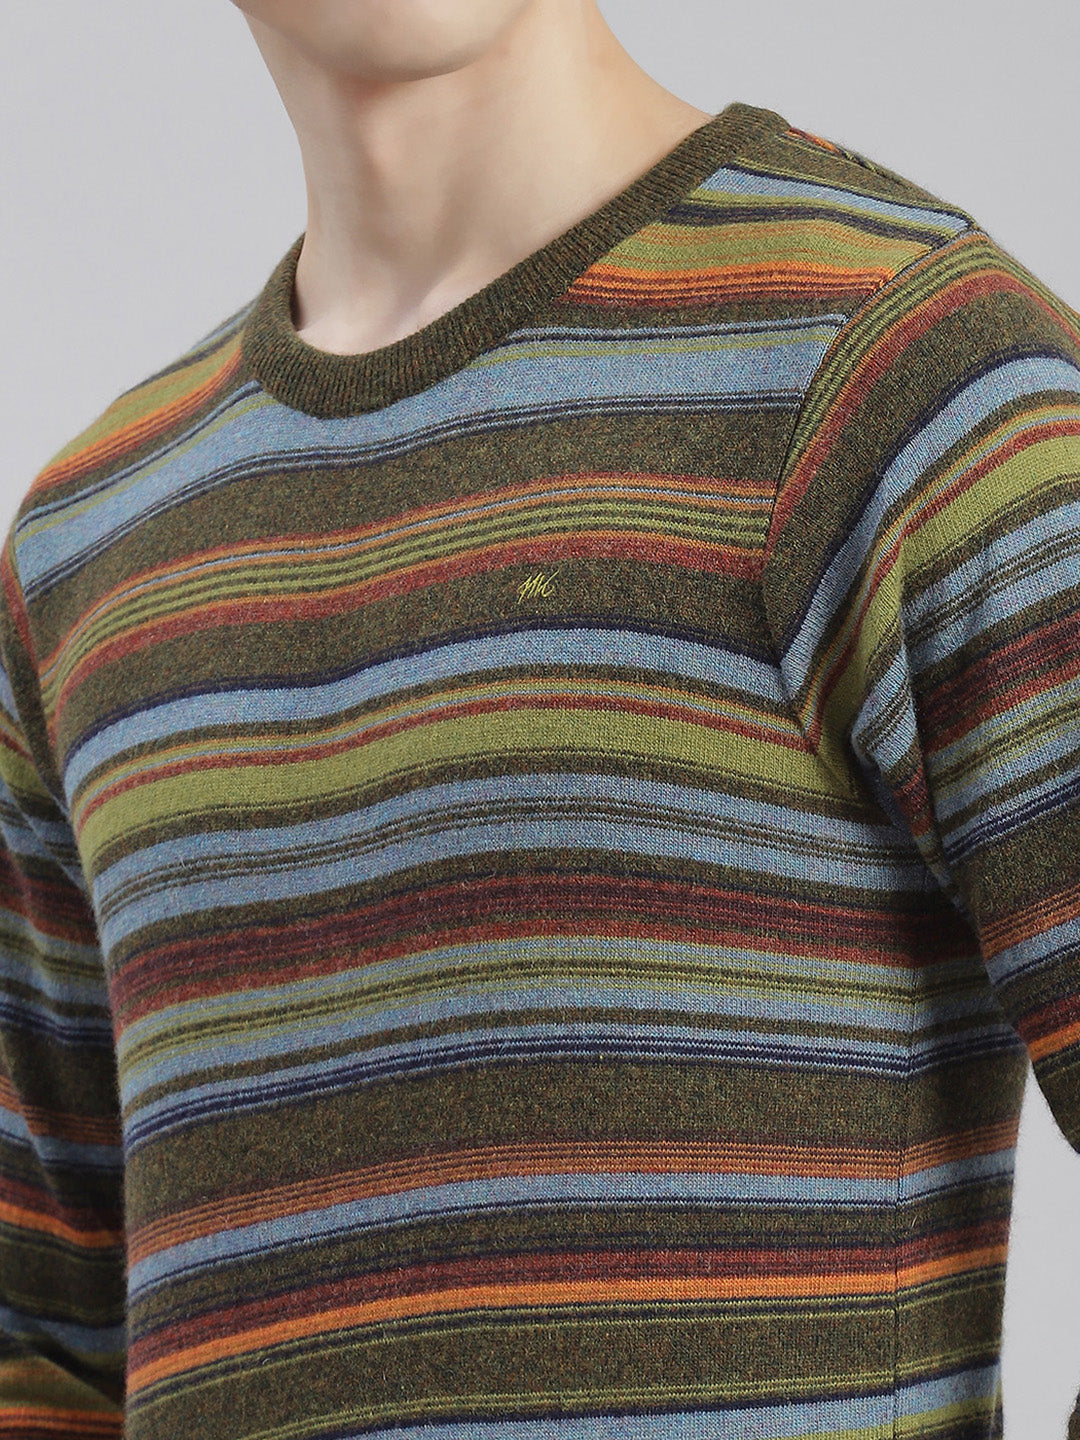 Men Olive Stripe Round Neck Full Sleeve Sweaters/Pullovers